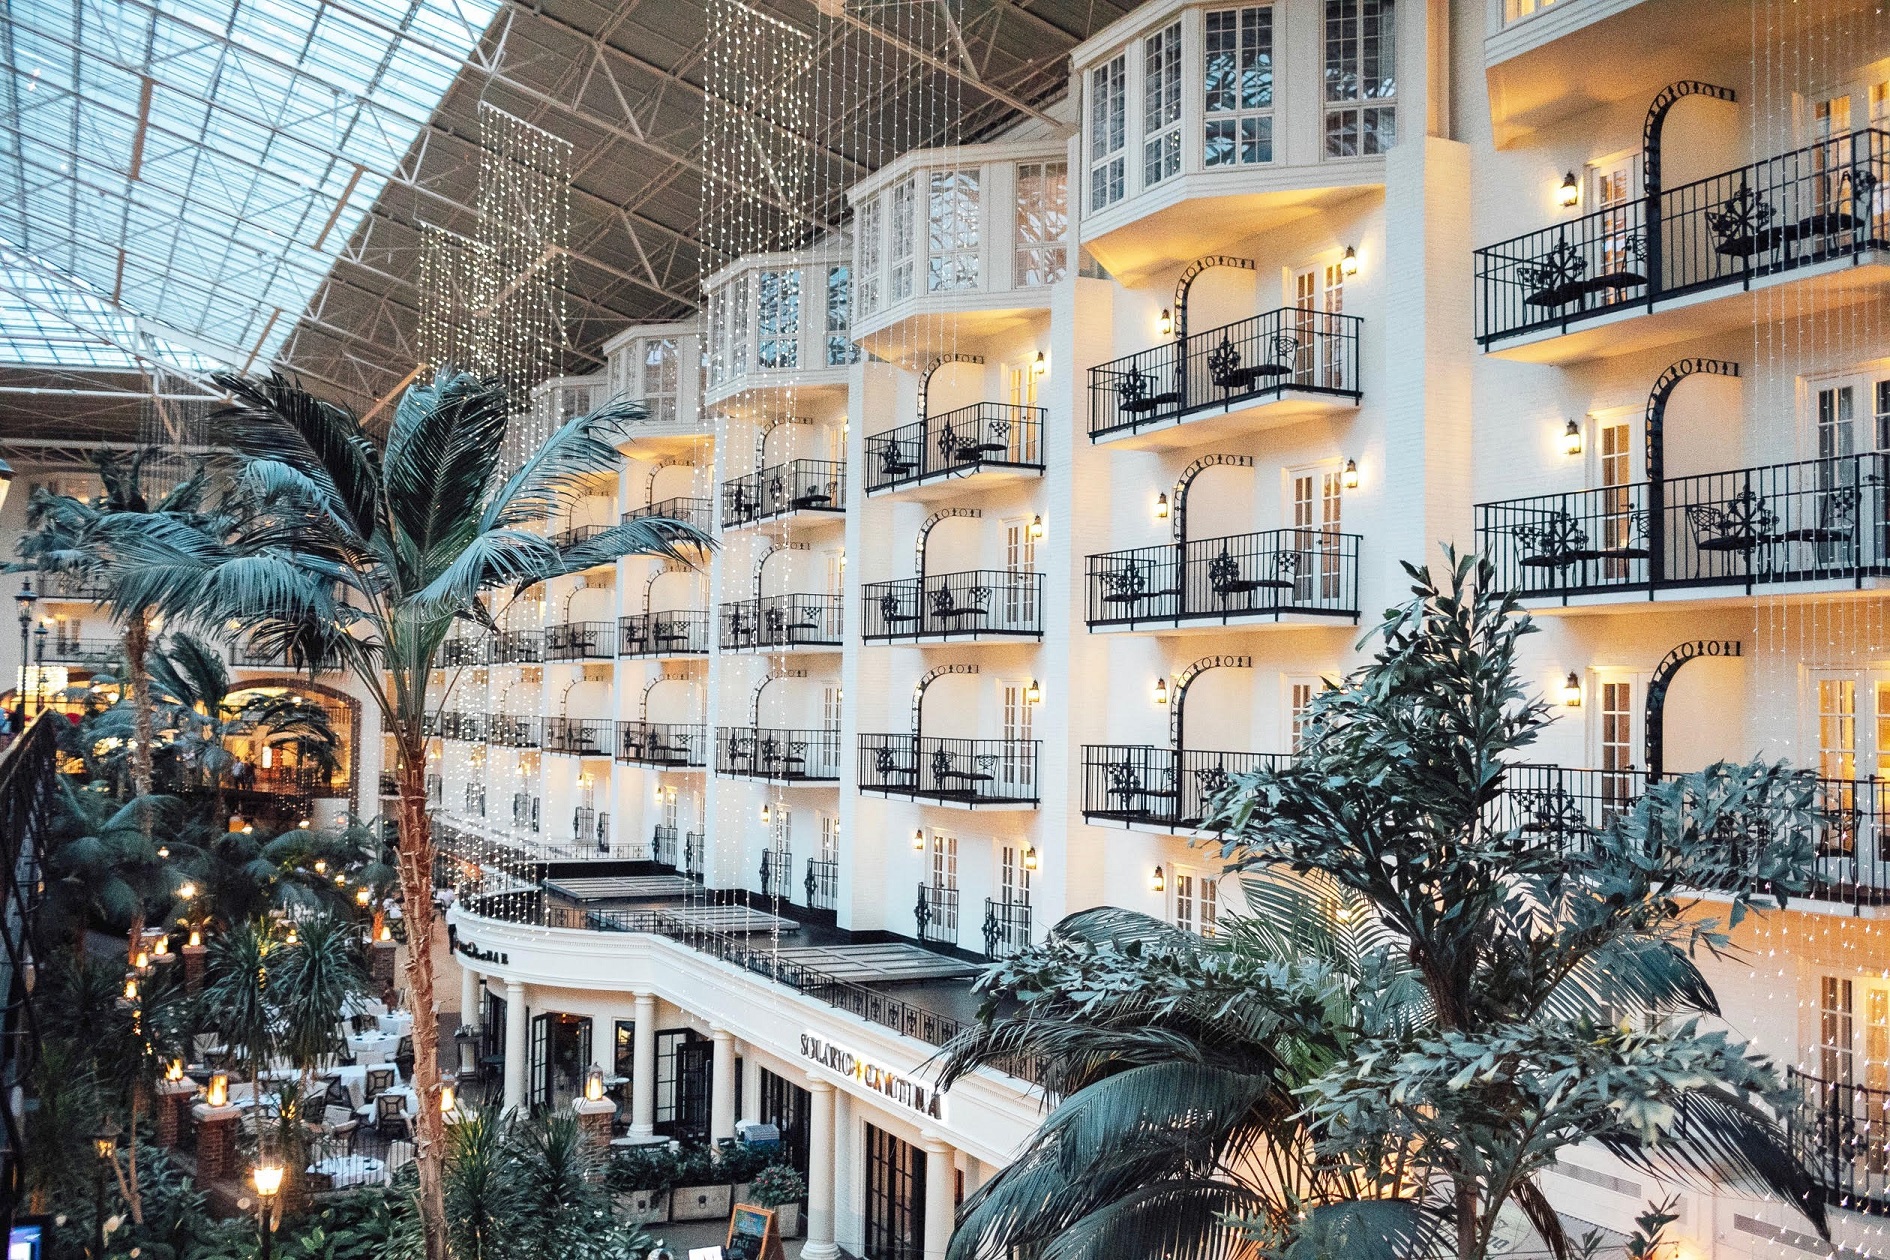 Things to do at Gaylord Opryland in Nashville featured by popular travel blogger, Walking in Memphis in High Heels